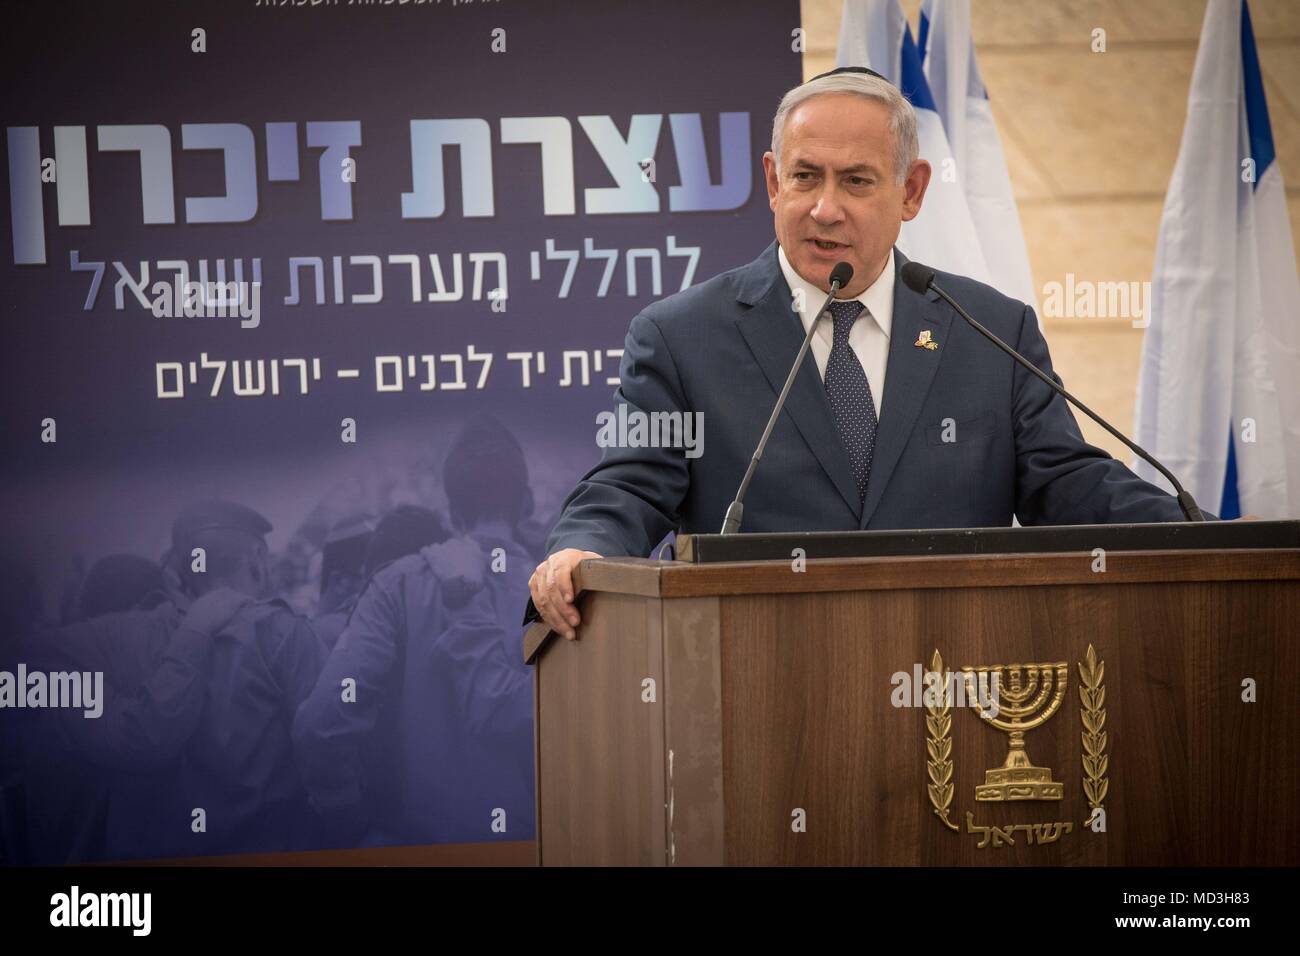 Jerusalem. 17th Apr, 2018. Israeli Prime Minister Benjamin Netanyahu speaks at a ceremony marking Memorial Day which commemorates Israel's fallen soldiers and victims of terror, on April 17, 2018. Credit: JINI/Xinhua/Alamy Live News Stock Photo